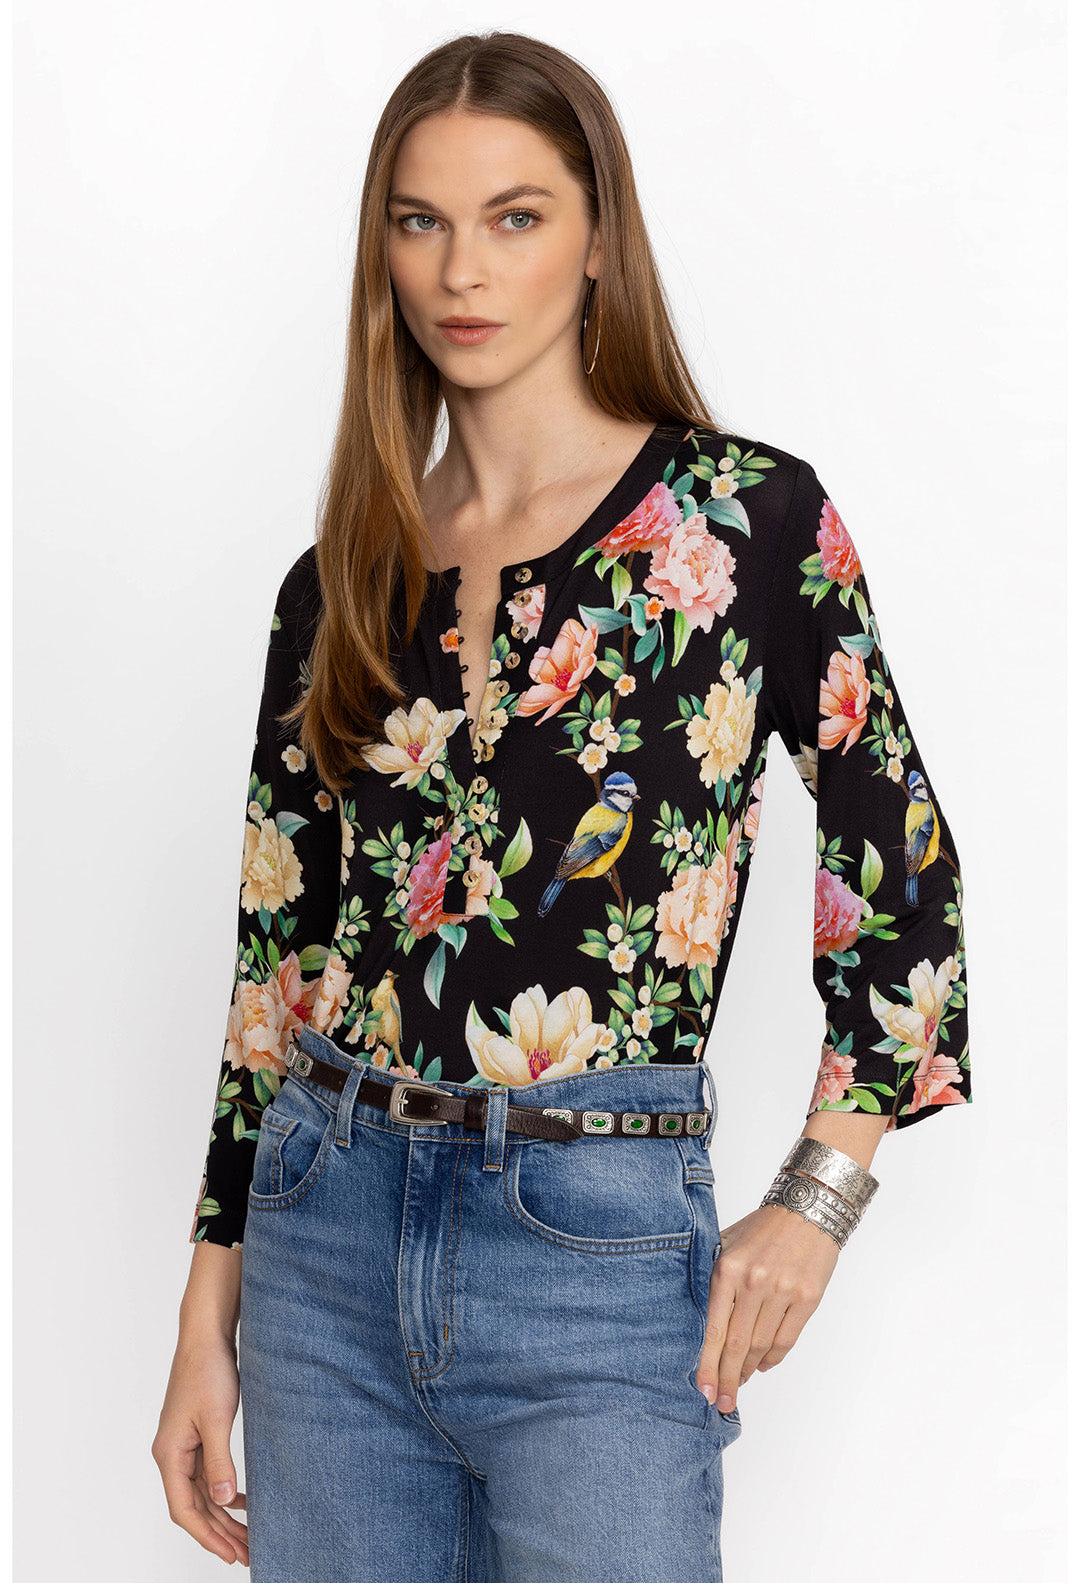 Johnny Was Janie Favorite Button Front Tunic Birdie Black Floral Top S ...